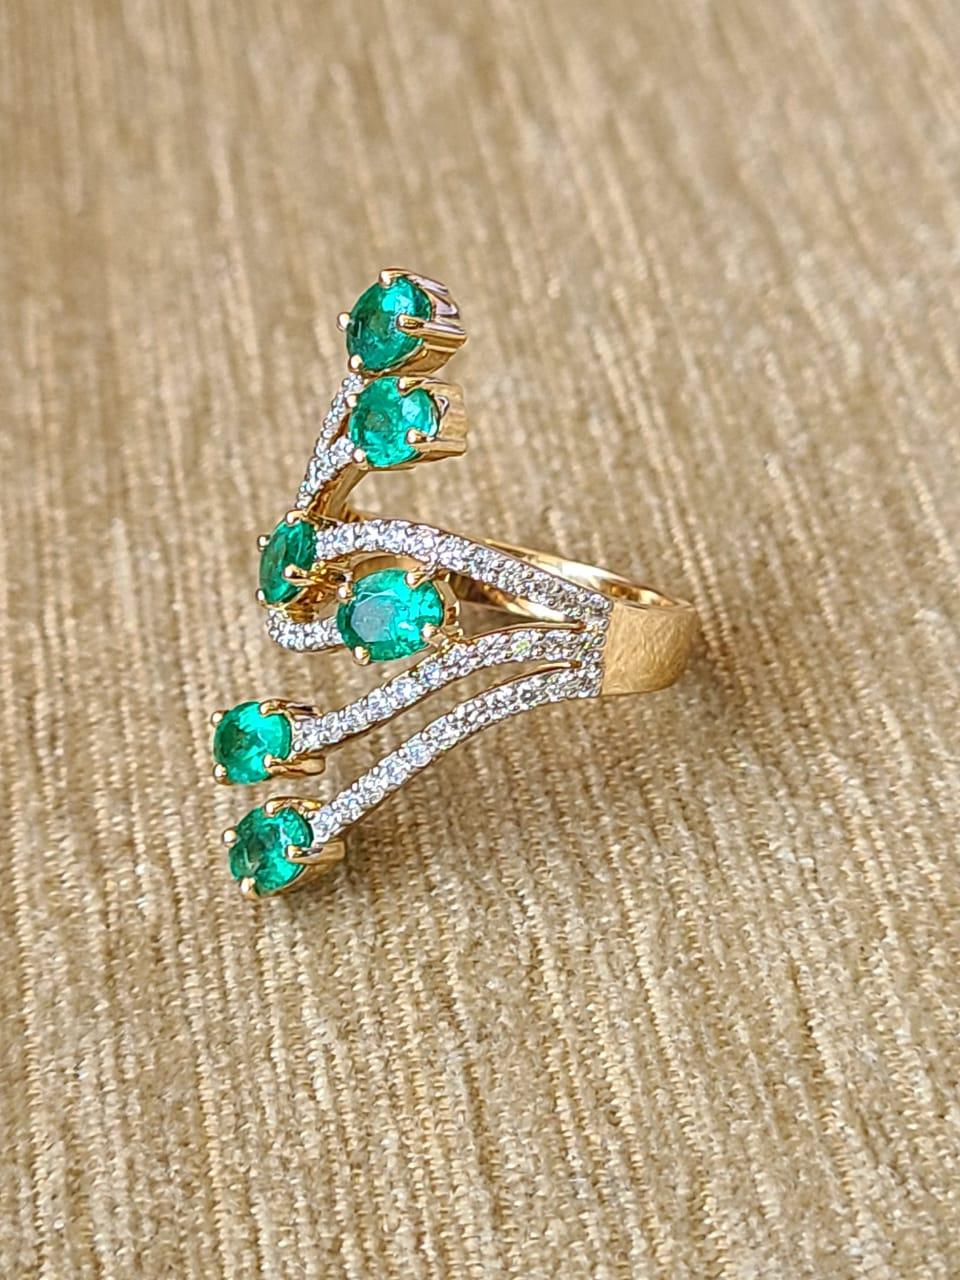 A very dainty and beautiful Emerald Band Ring set in 18K White Gold & Diamonds. The weight of the Emeralds is 1.97 carats. The Emeralds are completely natural, without treatment and are of Zambian origin. The weight of the Diamonds is 0.64 carats.